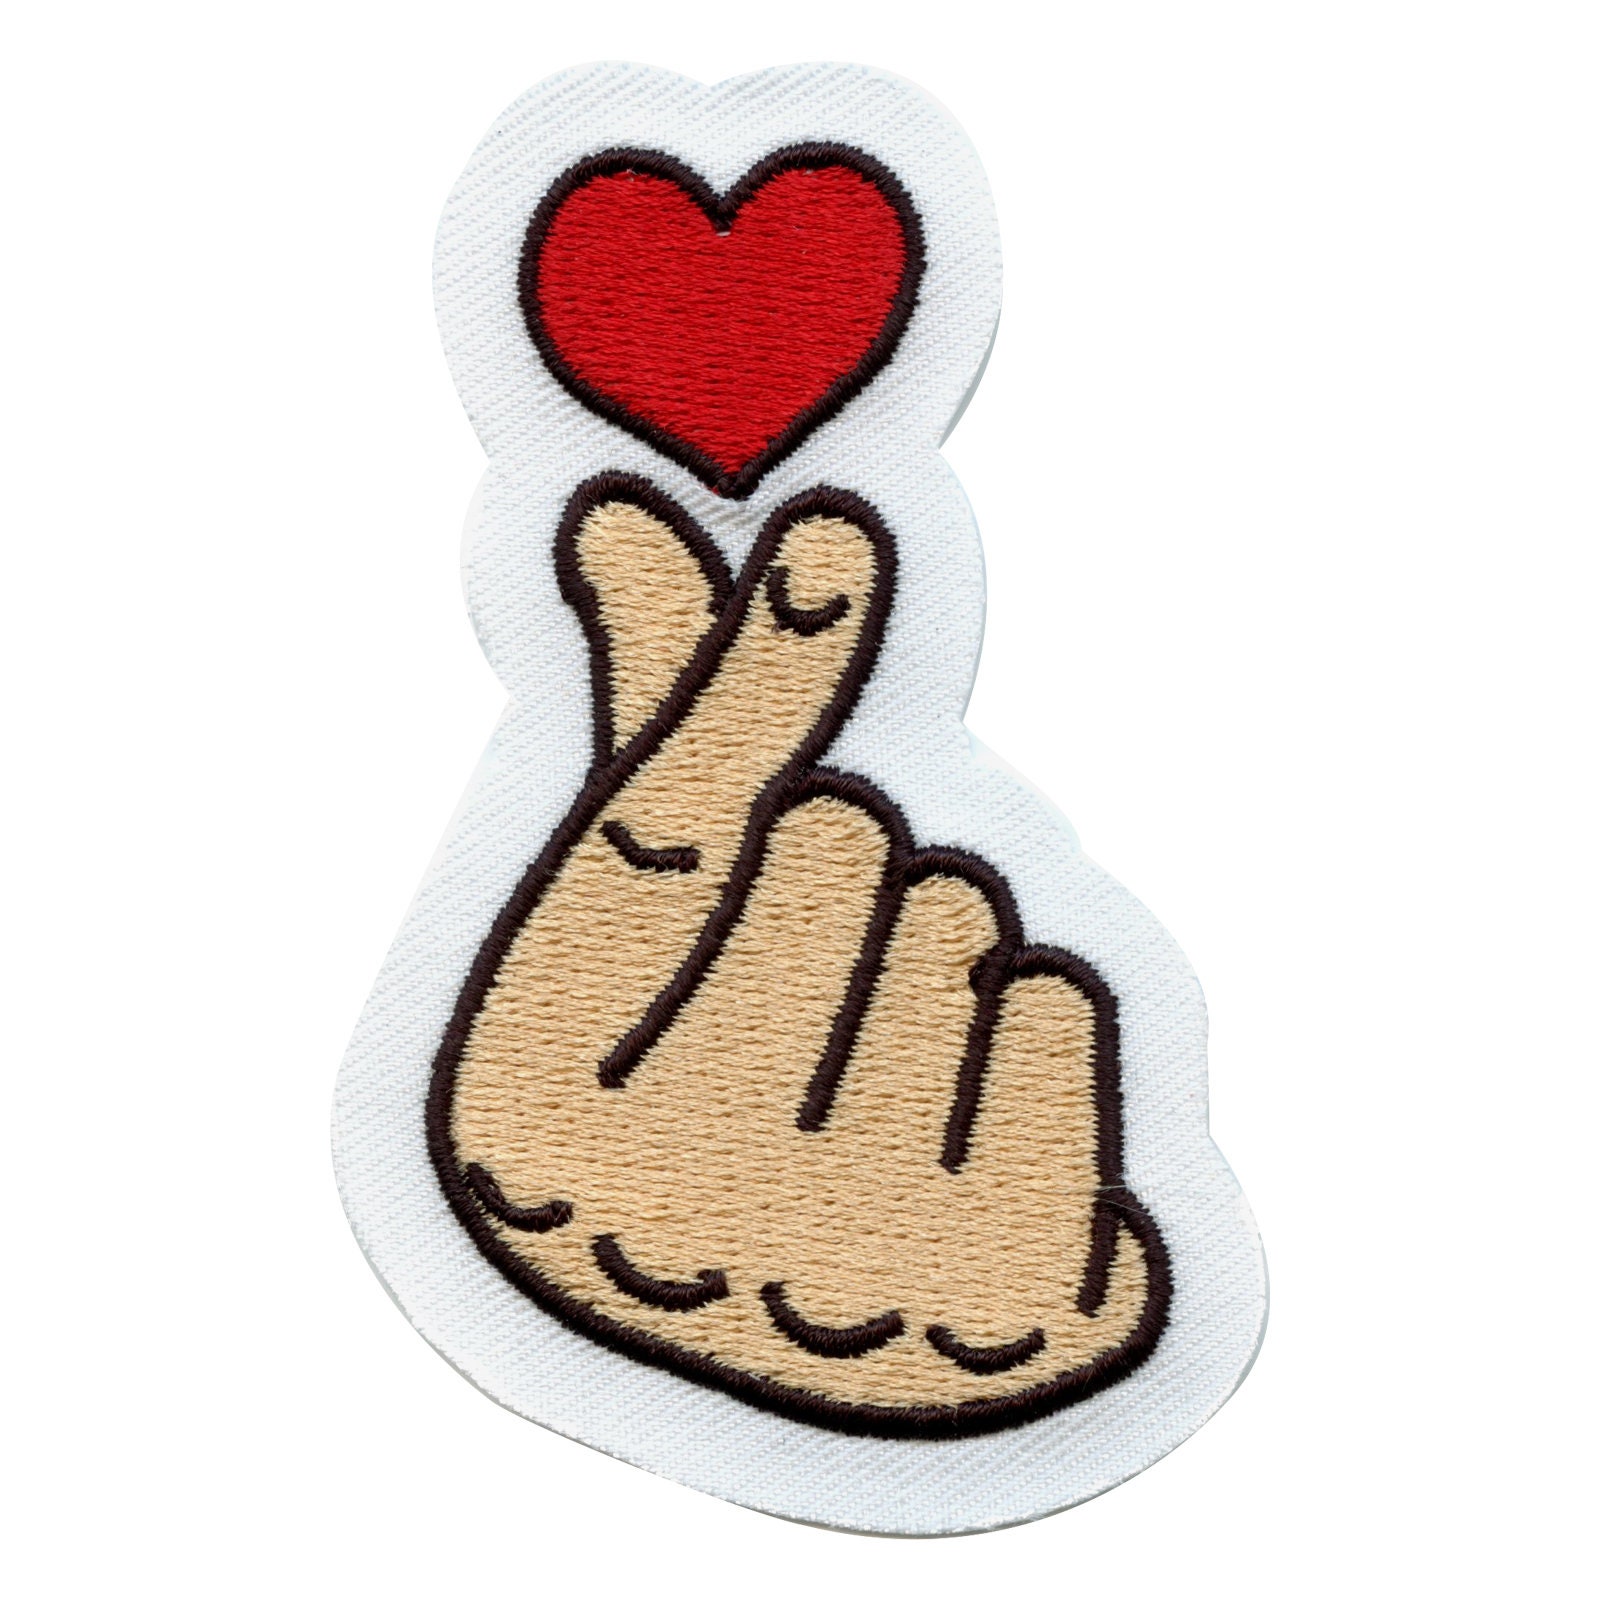 RED HEART PATCH iron-on embroidered Valentine's Day Love Romance Emoji  Romantic Applique